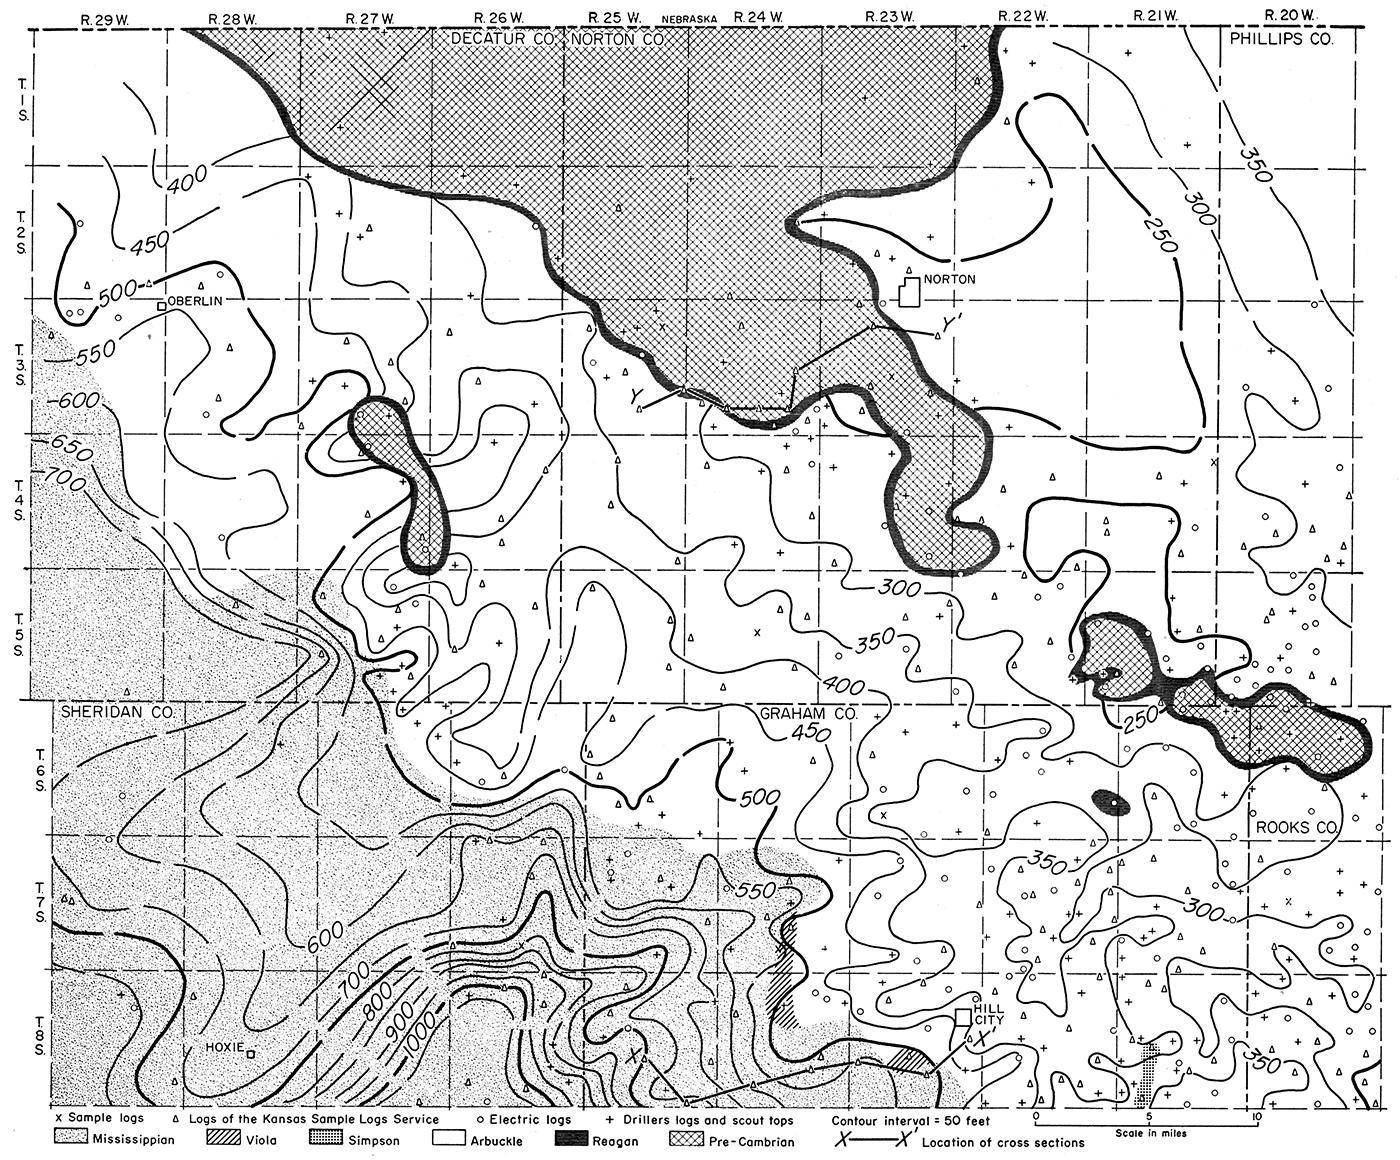 Isopachous map showing by 50-foot isopachs the thickness of the interval from the top of the Arbuckle group to the top of the Lansing group.